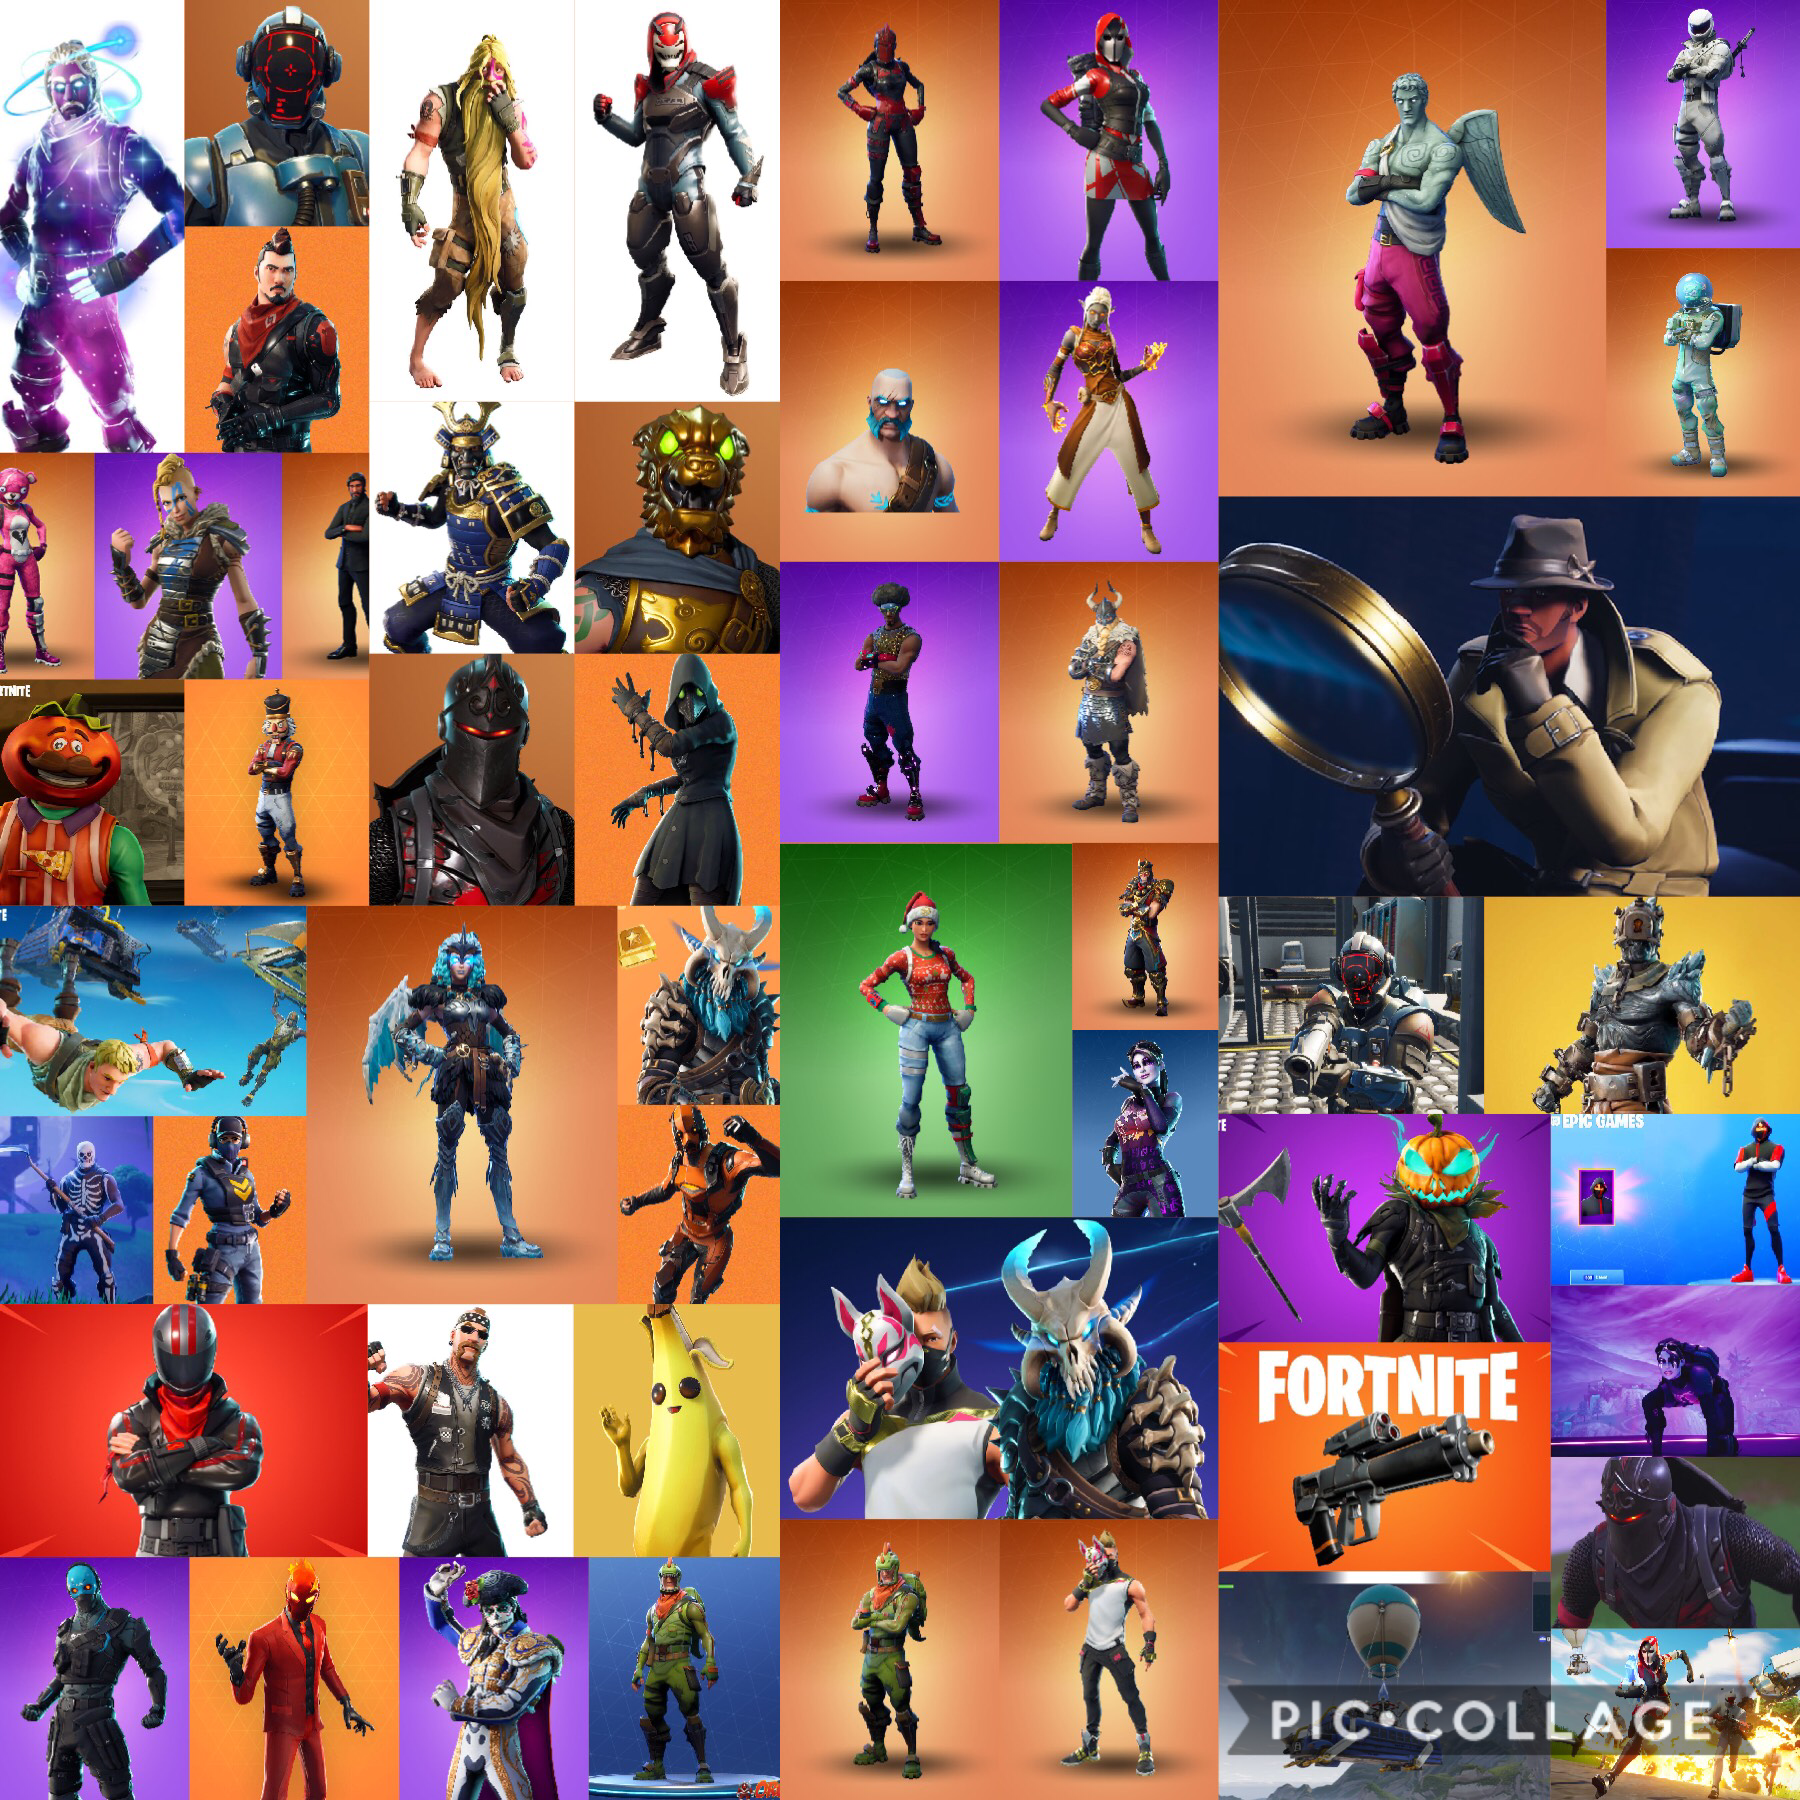 Like or follow if you want fortnite tomcome back